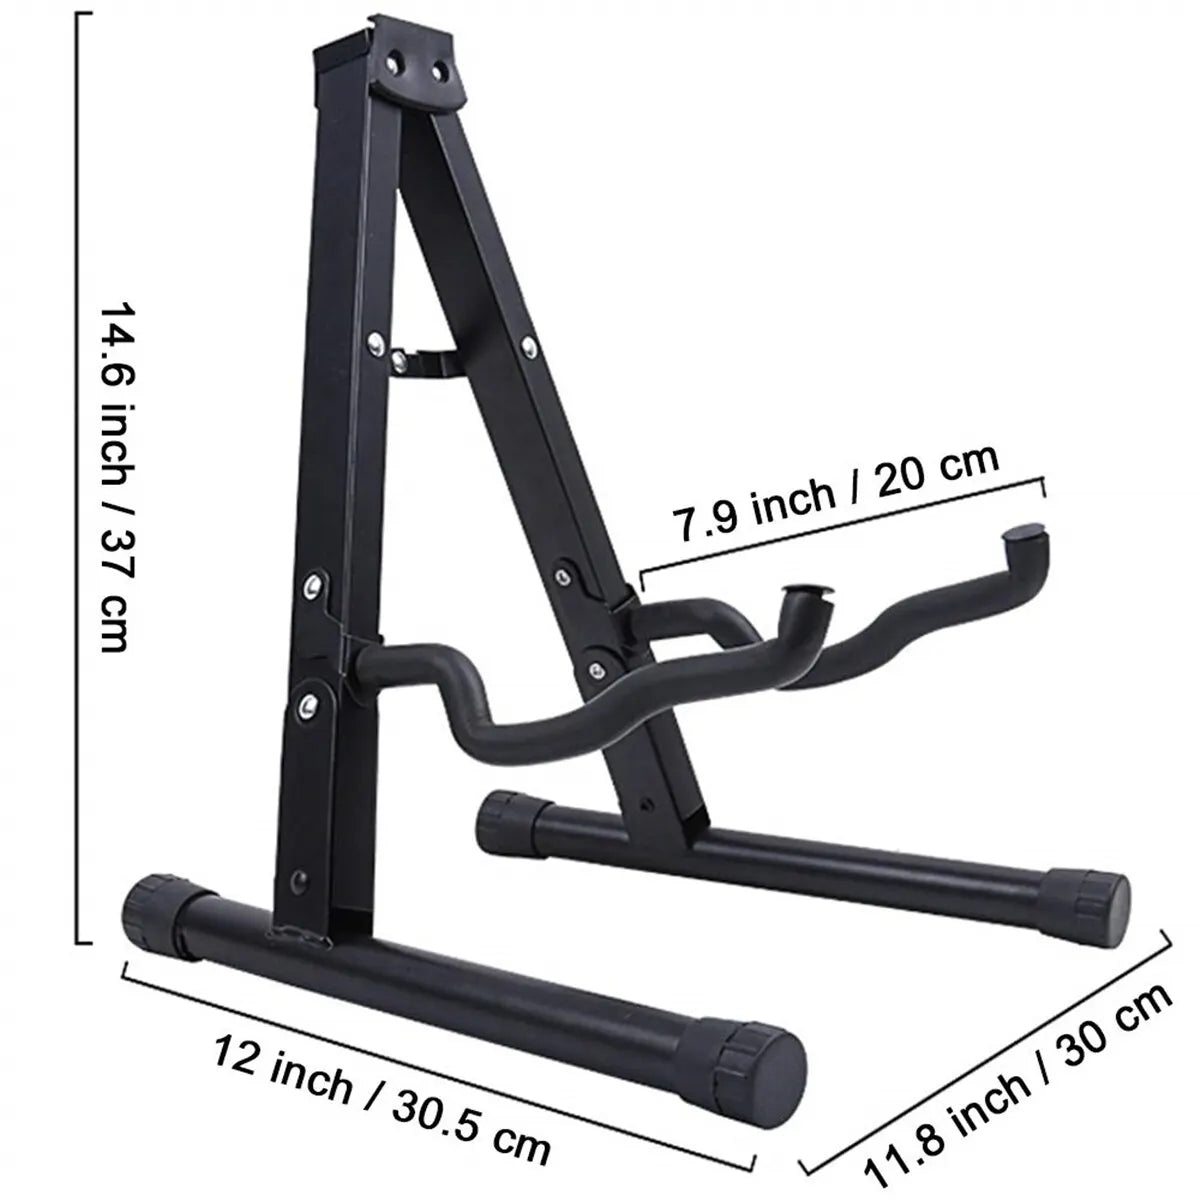 Folding A-Frame Guitar Stand: Universal Metal Stand for Acoustic, Classical, Electric, and Bass Guitars, Banjo, Ukulele - Portable Floor Stand